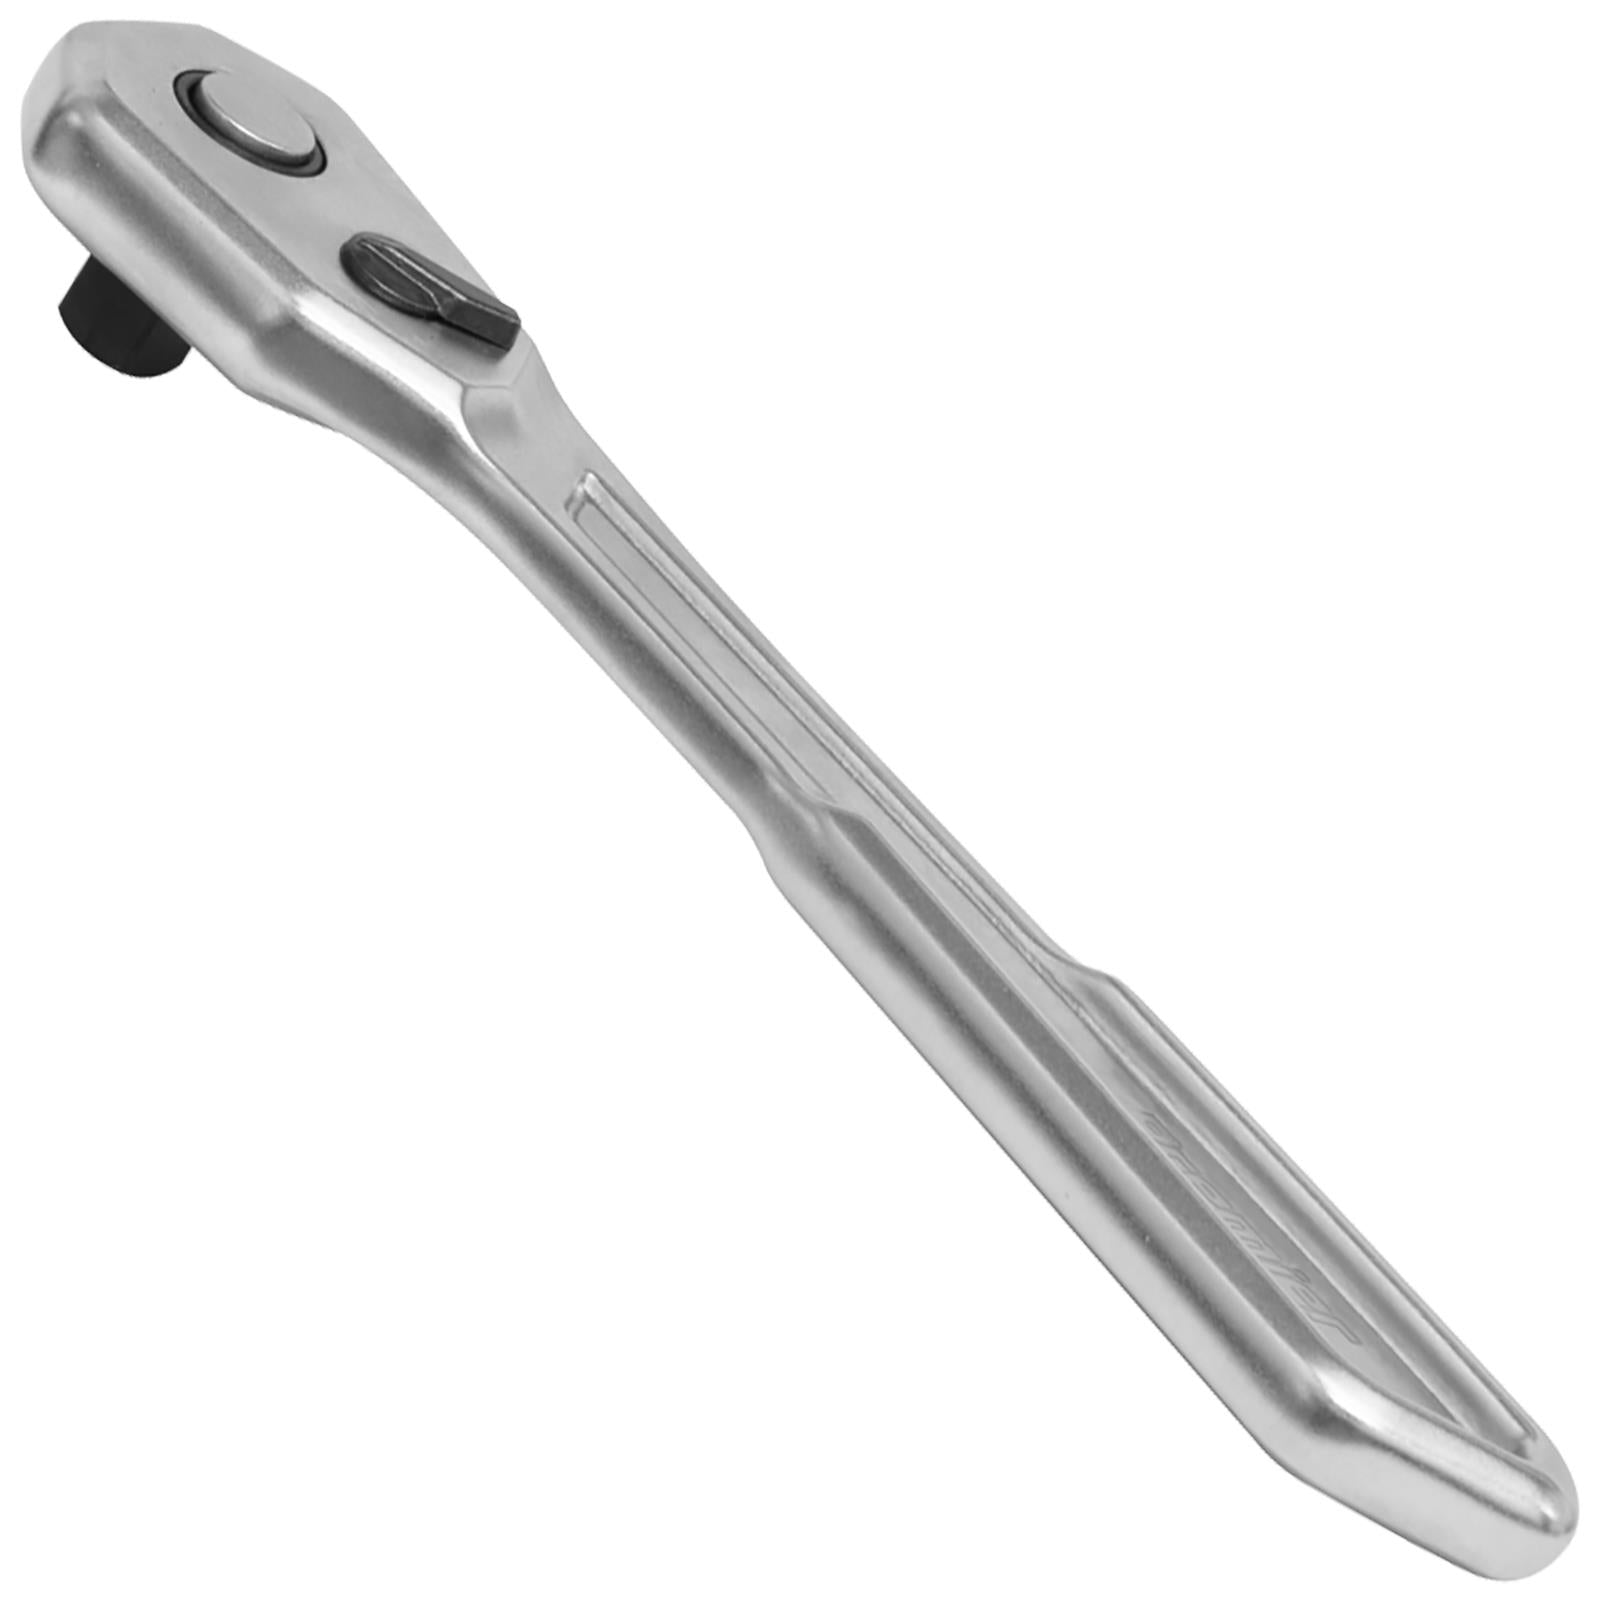 Sealey Premier Ratchet Wrench Low Profile 3/8" Drive Flip Reverse 90 Tooth